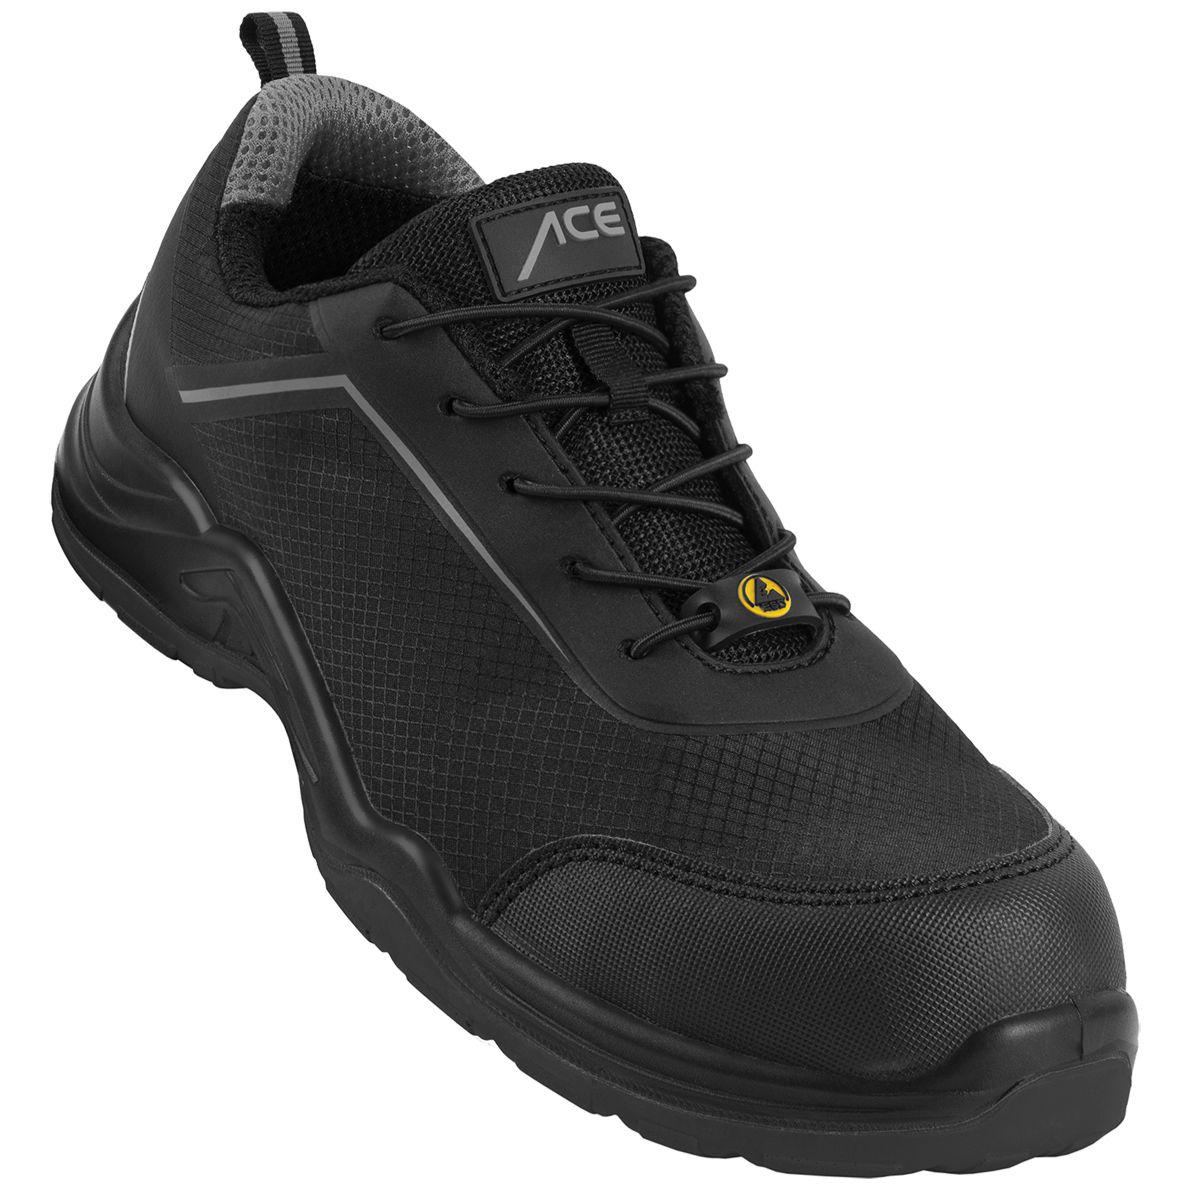 ACE Sapphire S1-P work sneakers - with plastic toe cap - safety shoes for work - black/grey - 46